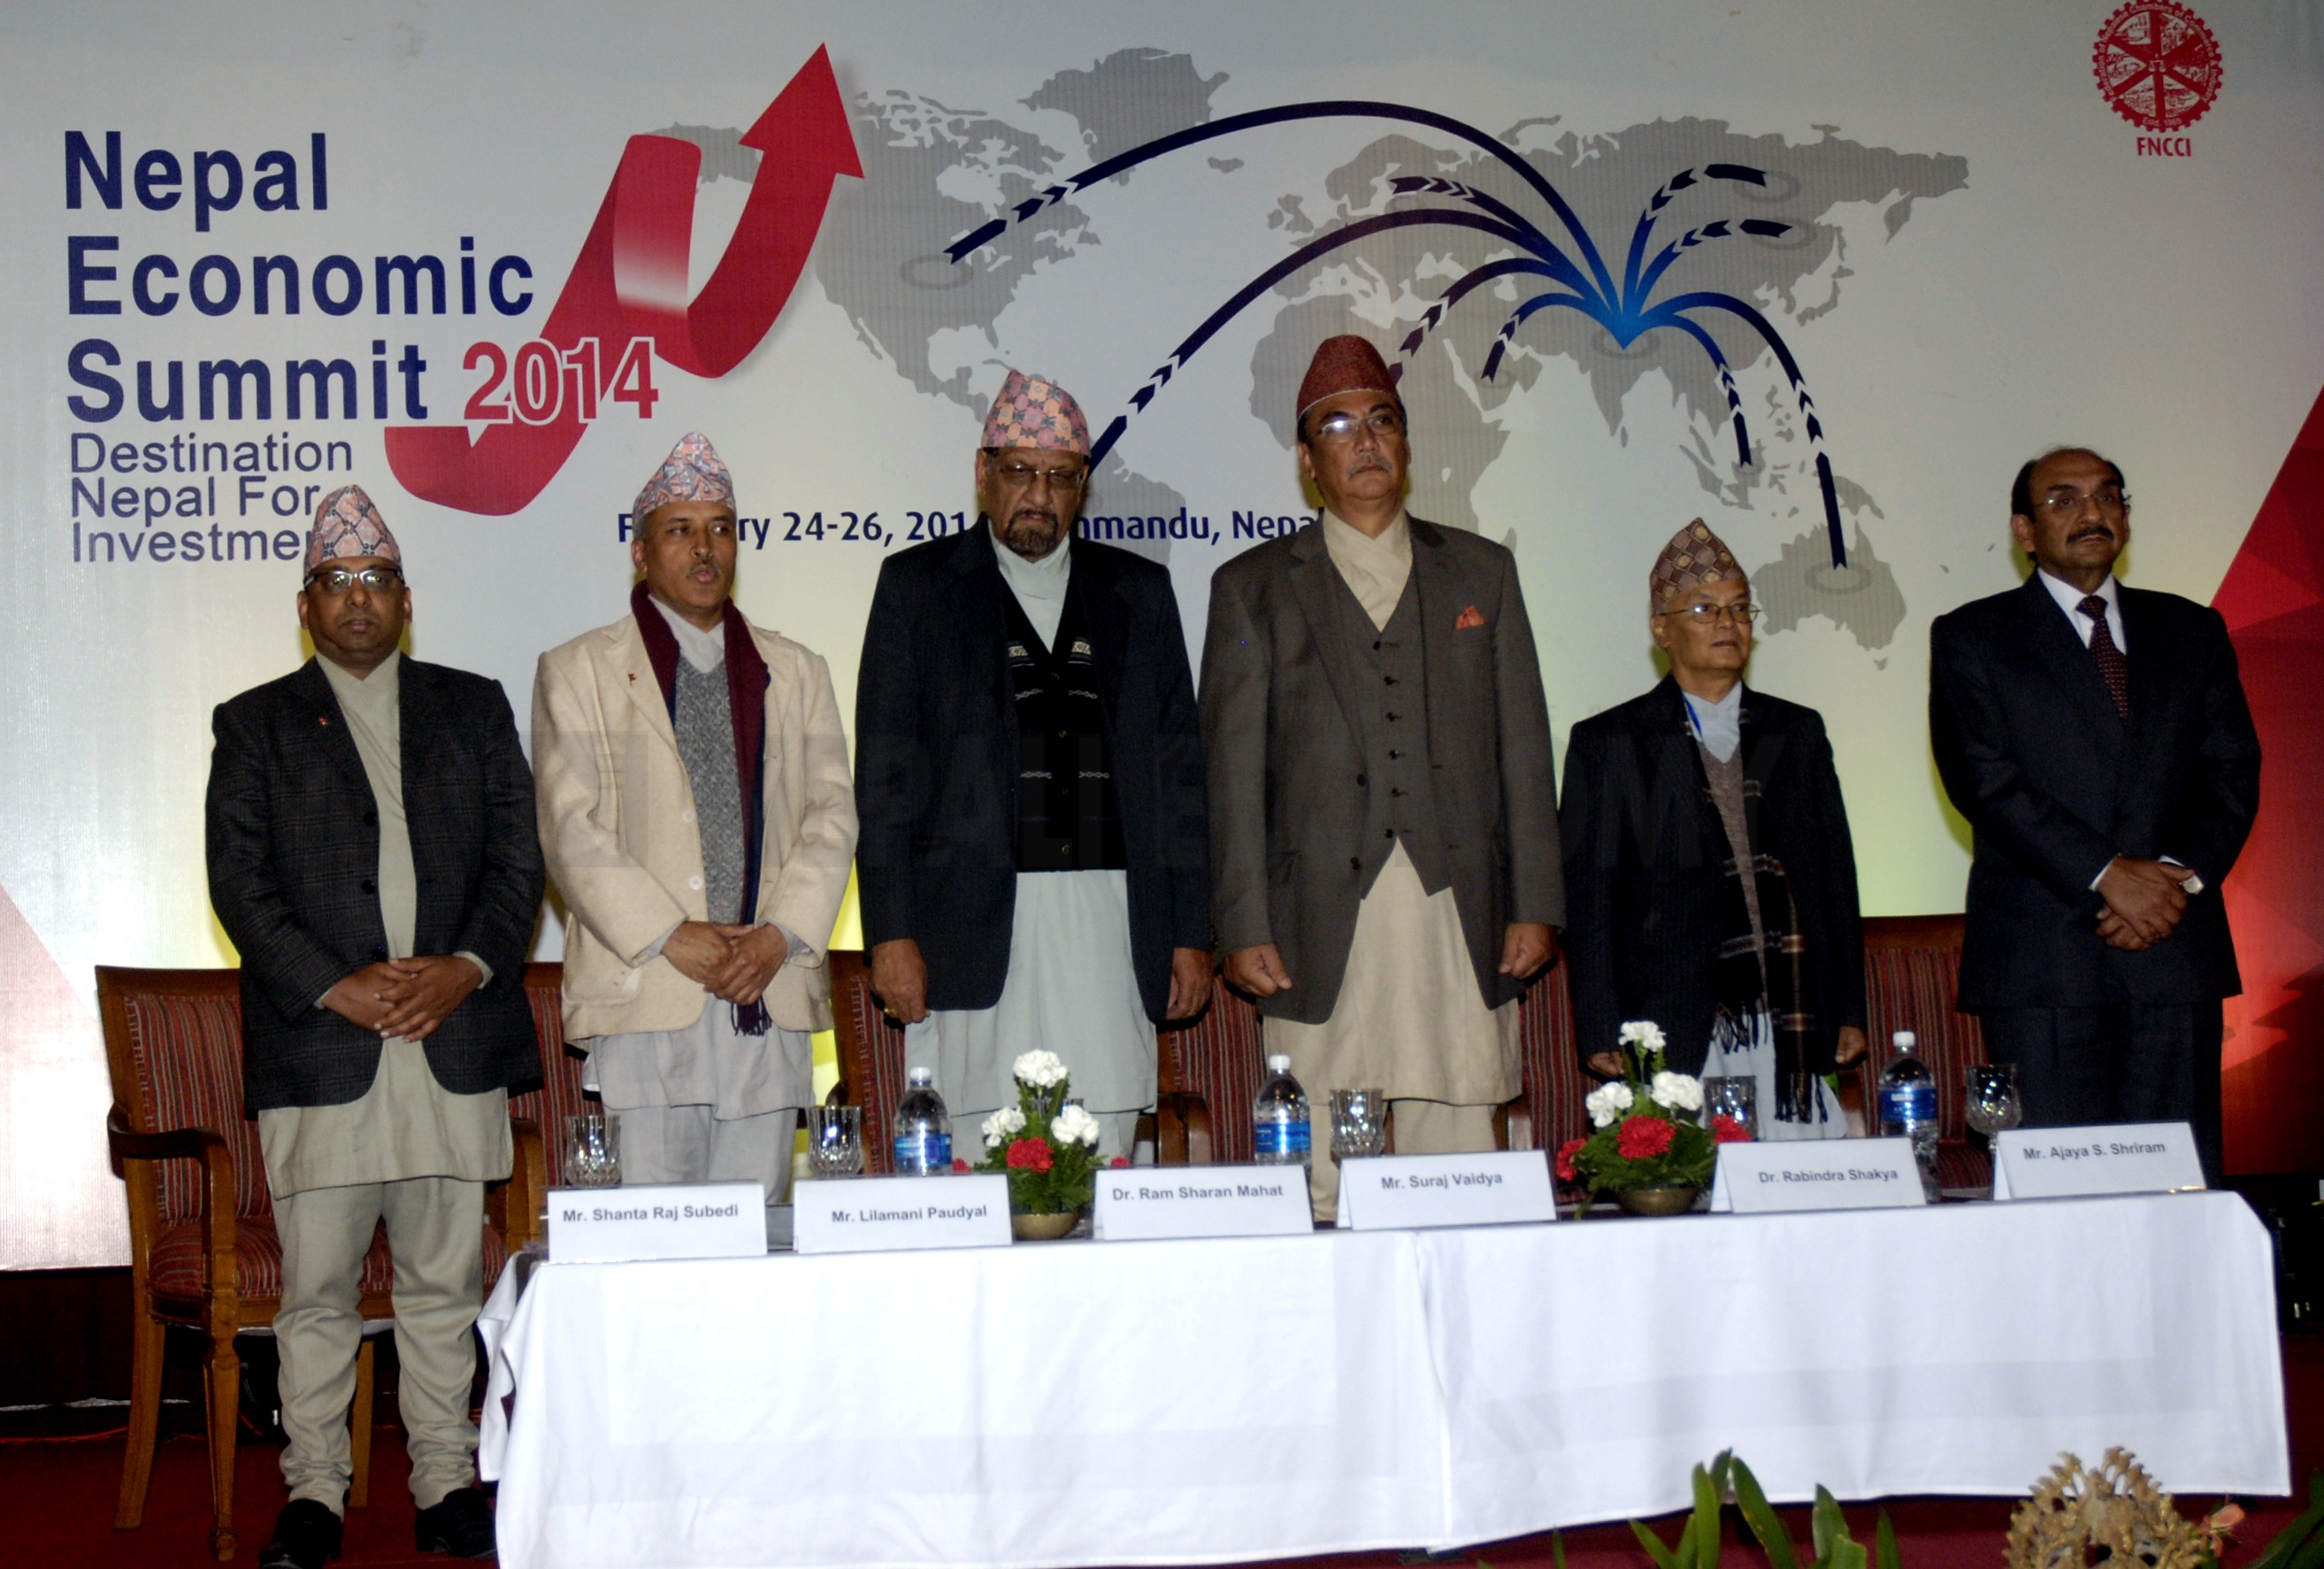 Nepal attractive destination for investment: Mahat